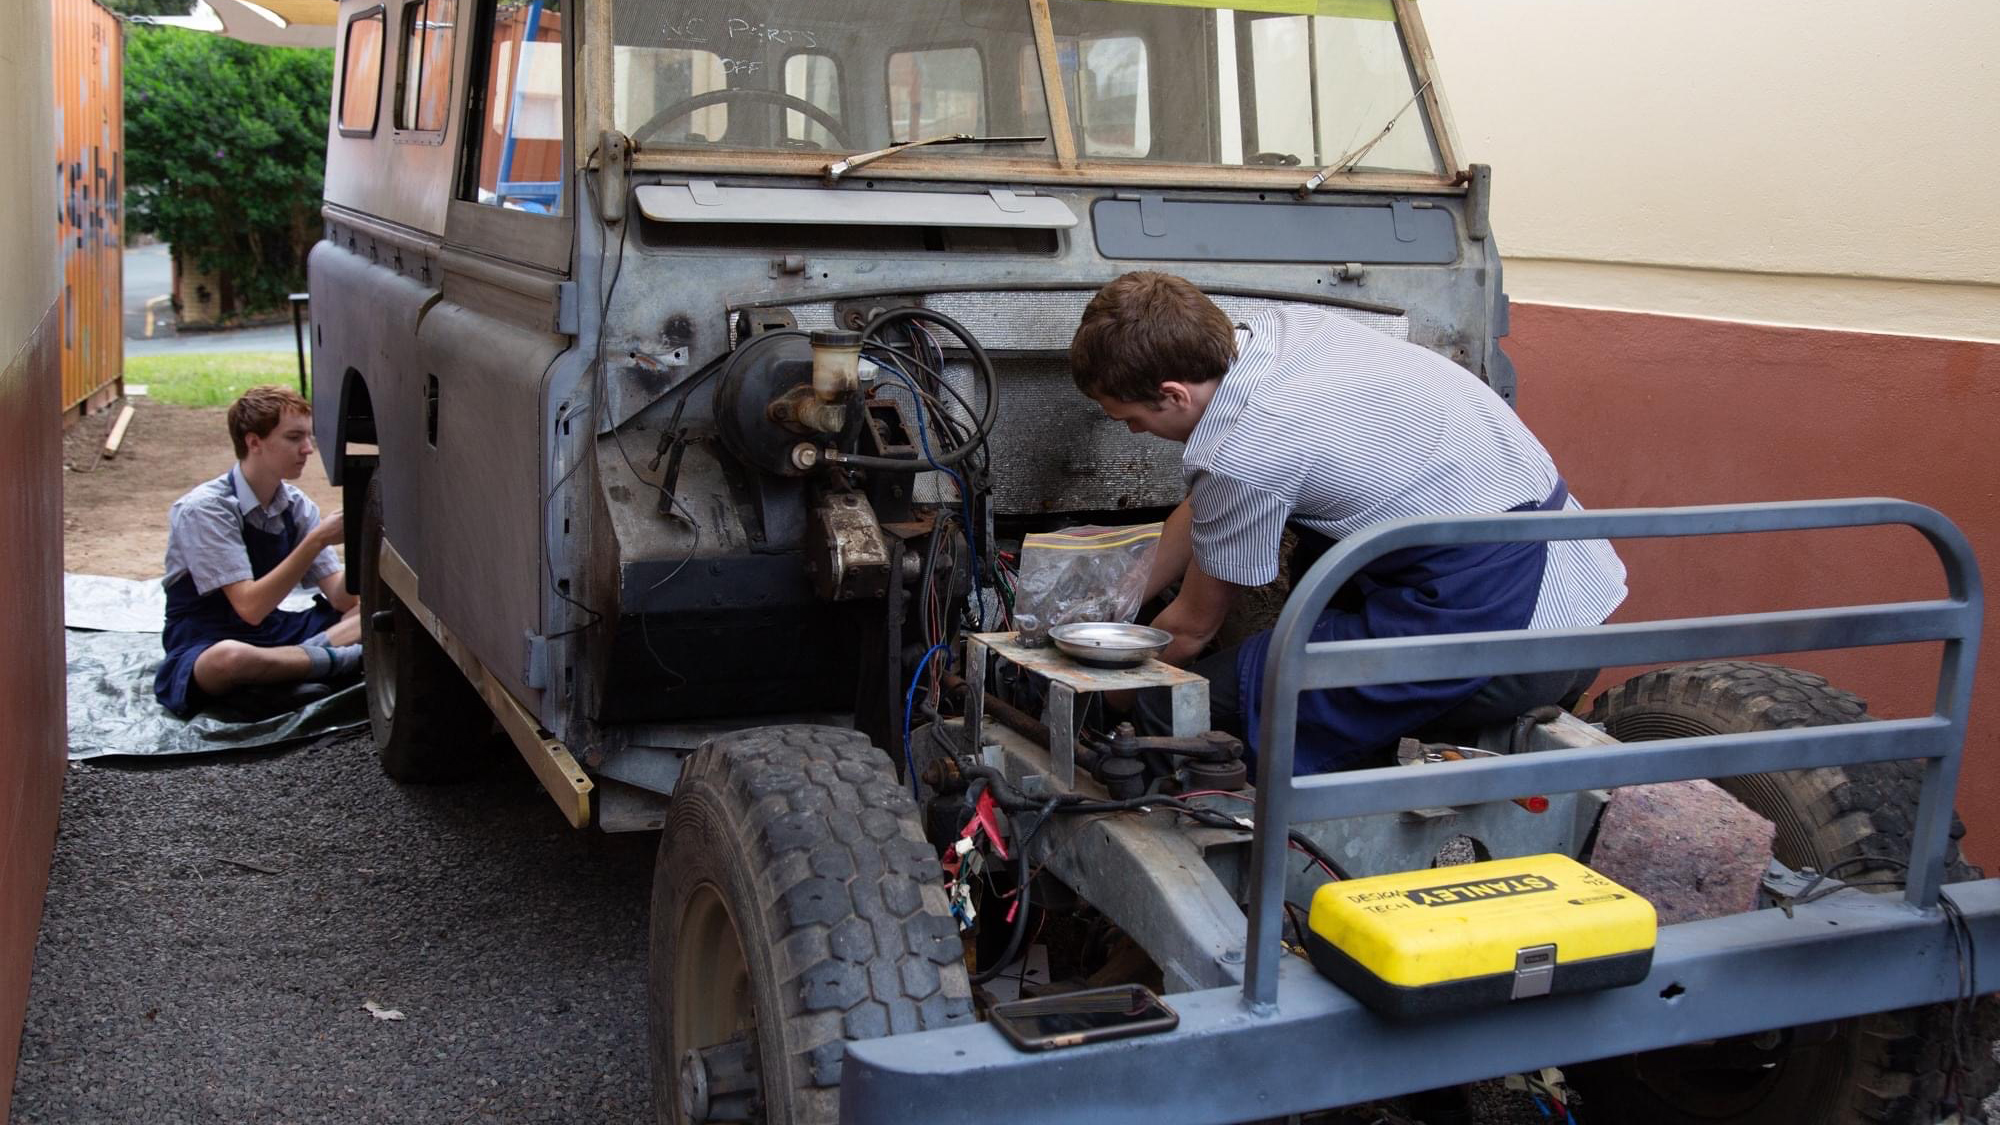 1974 Land Rover Series III at Matthew Flinders Anglican College in the process of an electric conversion